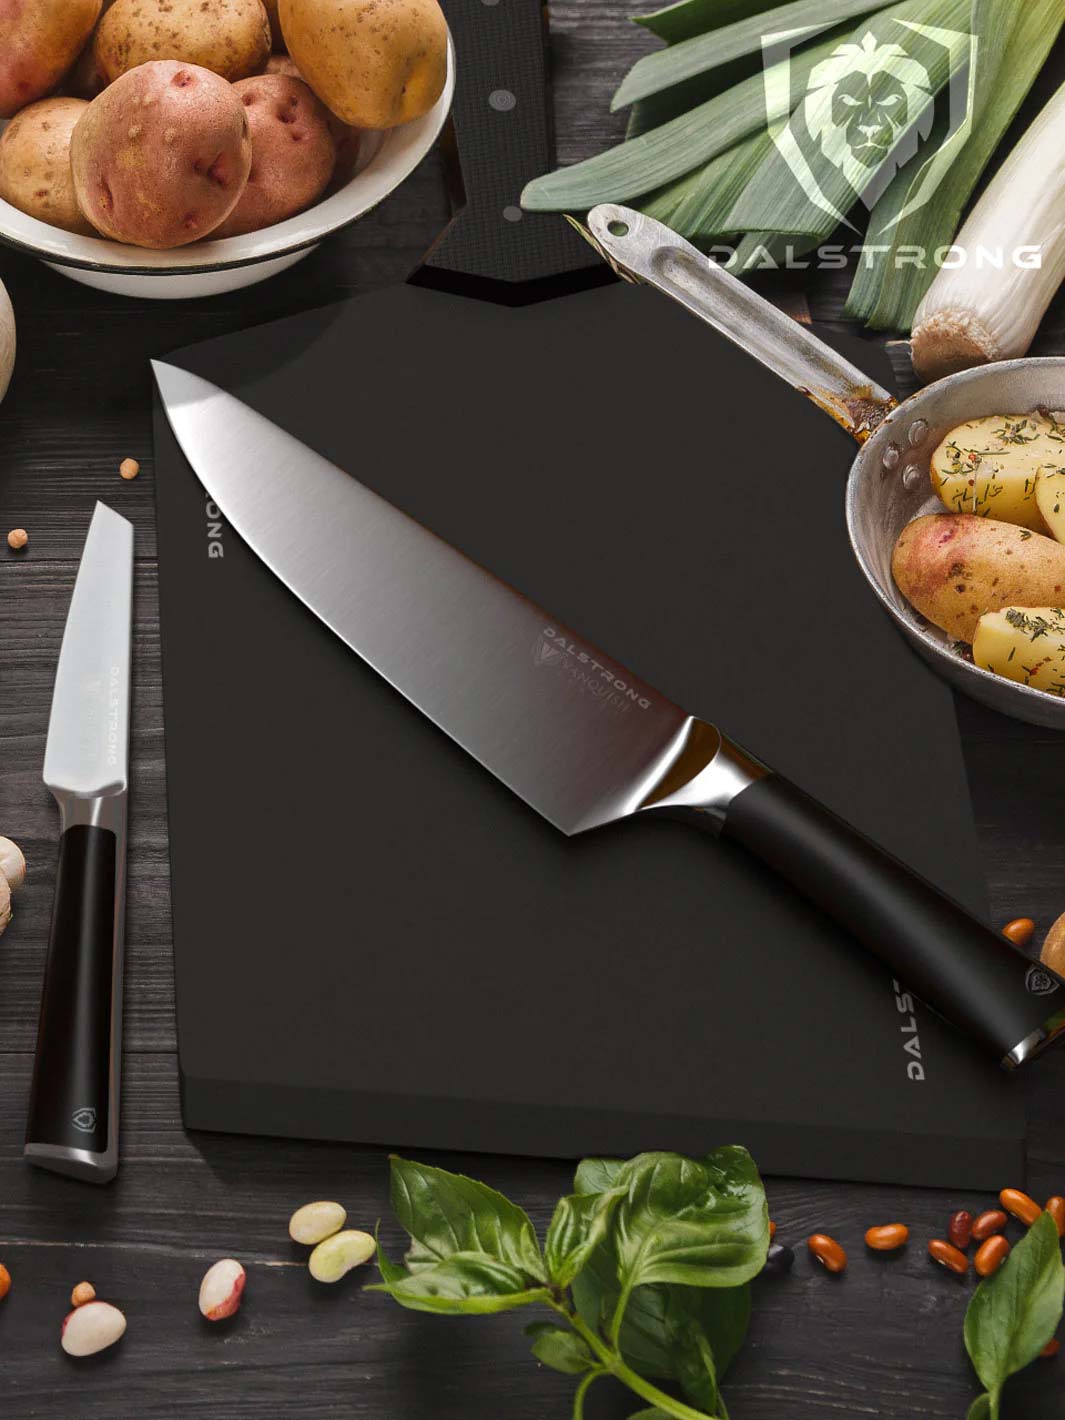 Dalstrong vanquish series 8 inch chef knife with black handle on a cutting board with potatoes.